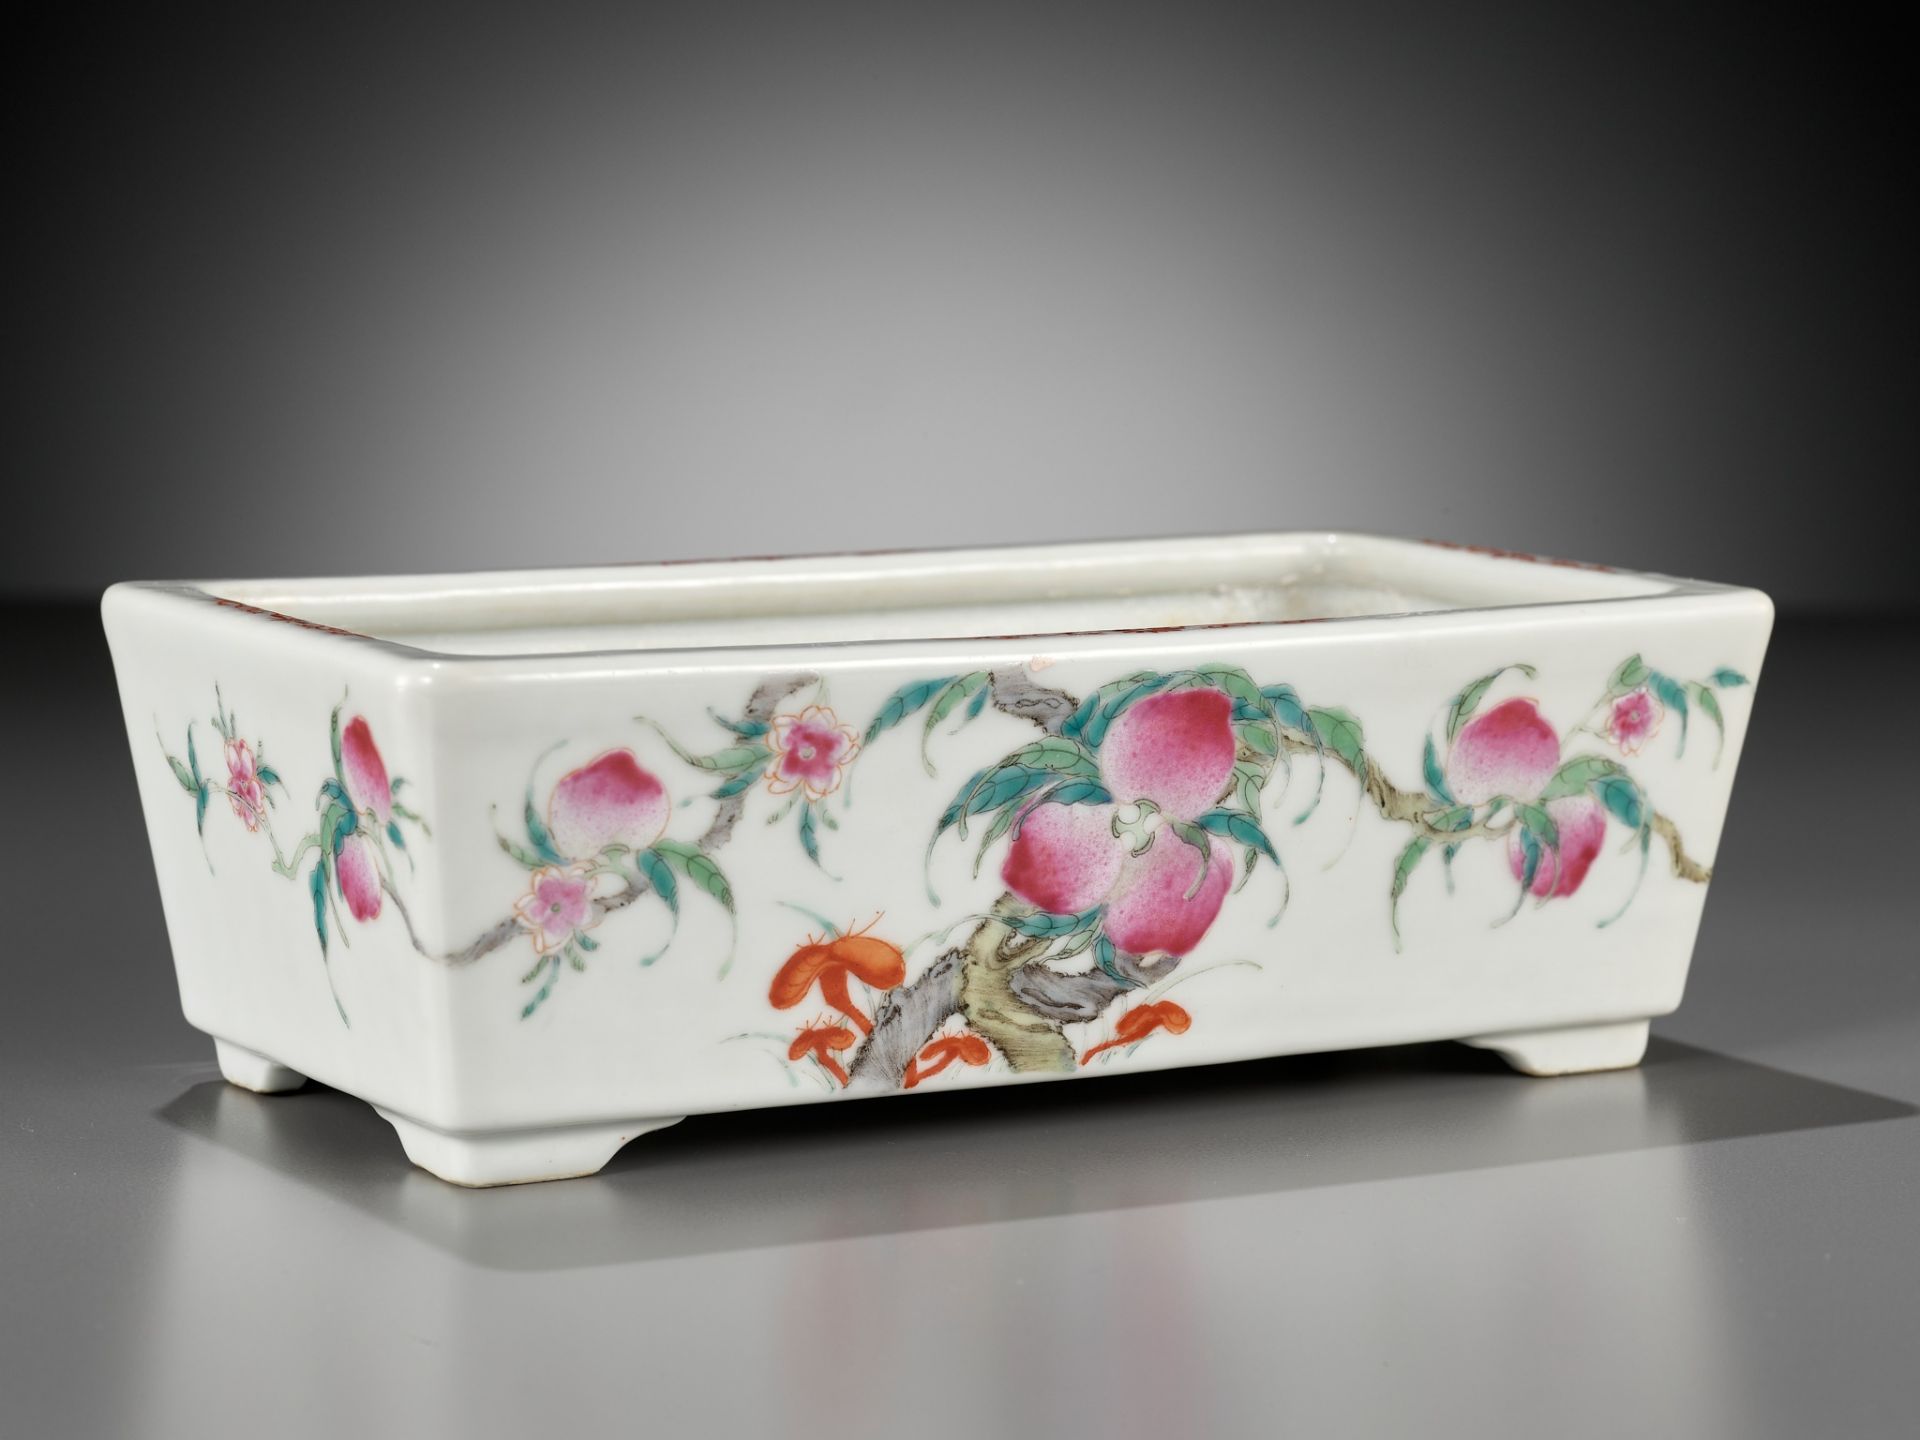 A FAMILLE ROSE 'NINE PEACHES' JARDINIERE, GUANGXU MARK AND PROBABLY OF THE PERIOD